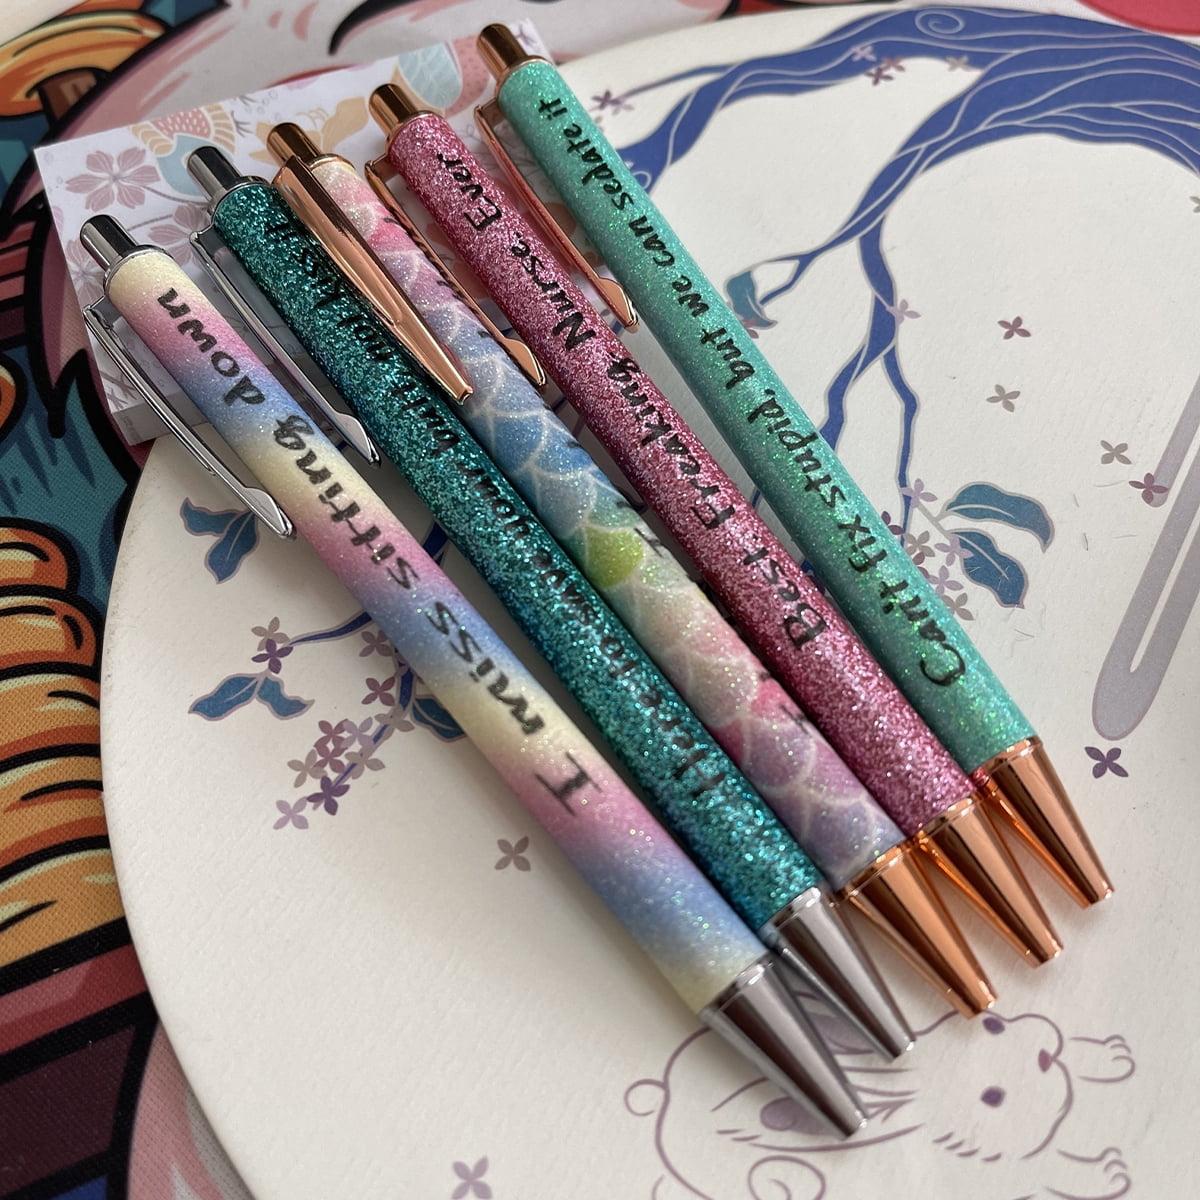 Funny Weekday + Work Glitter Metal Pens - 9 pieces - Beware - offensive  language